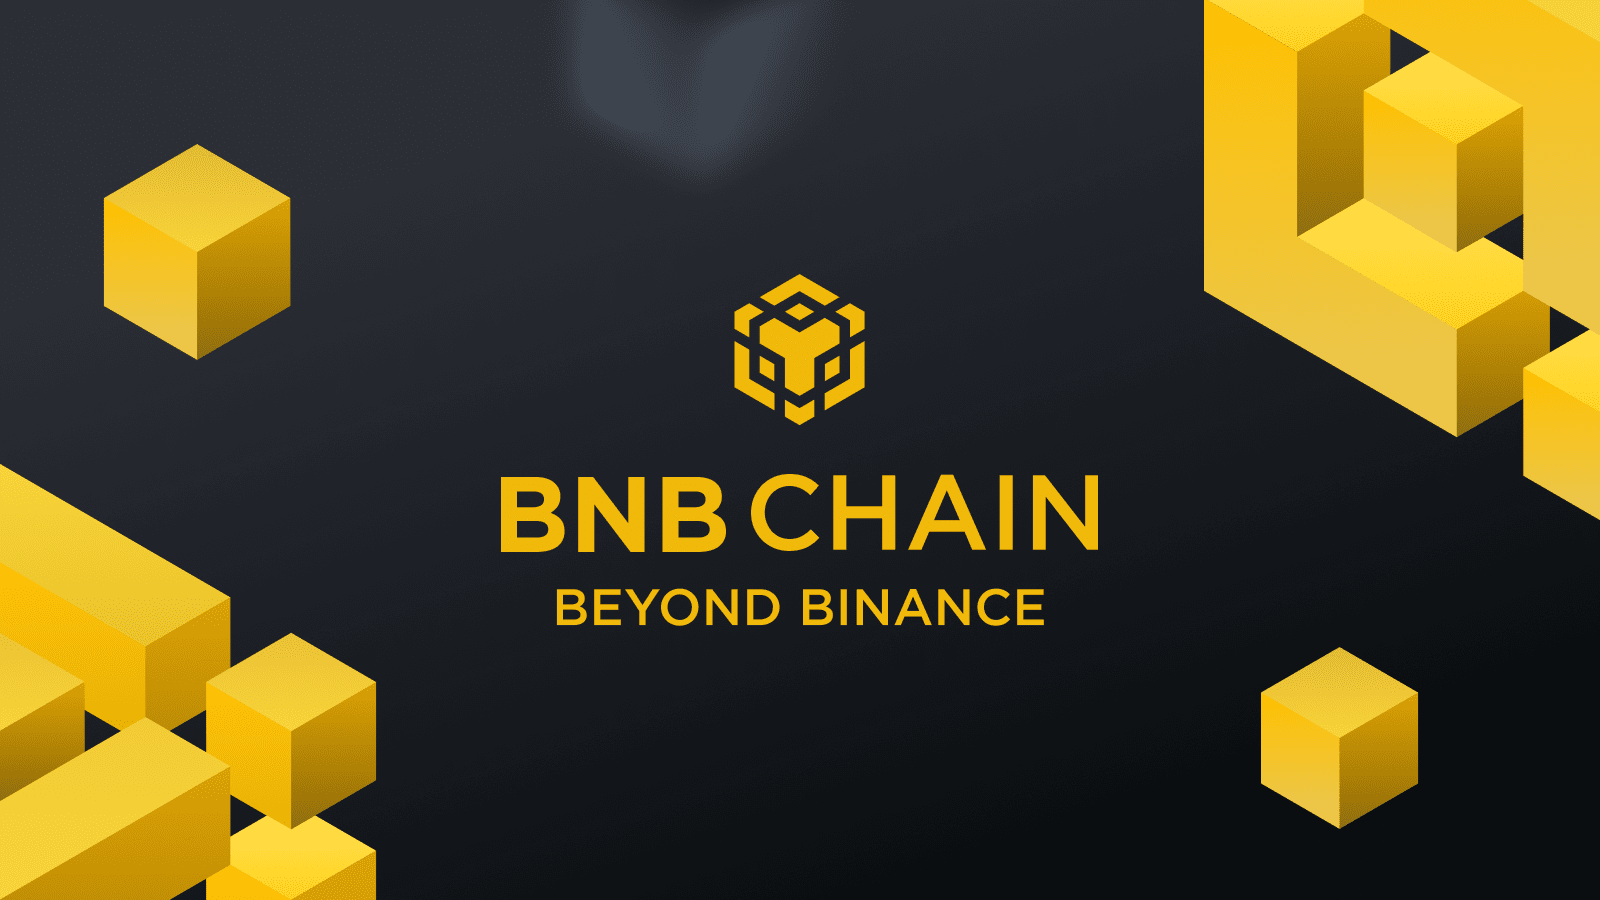 Growth potential of BNB Chain projects